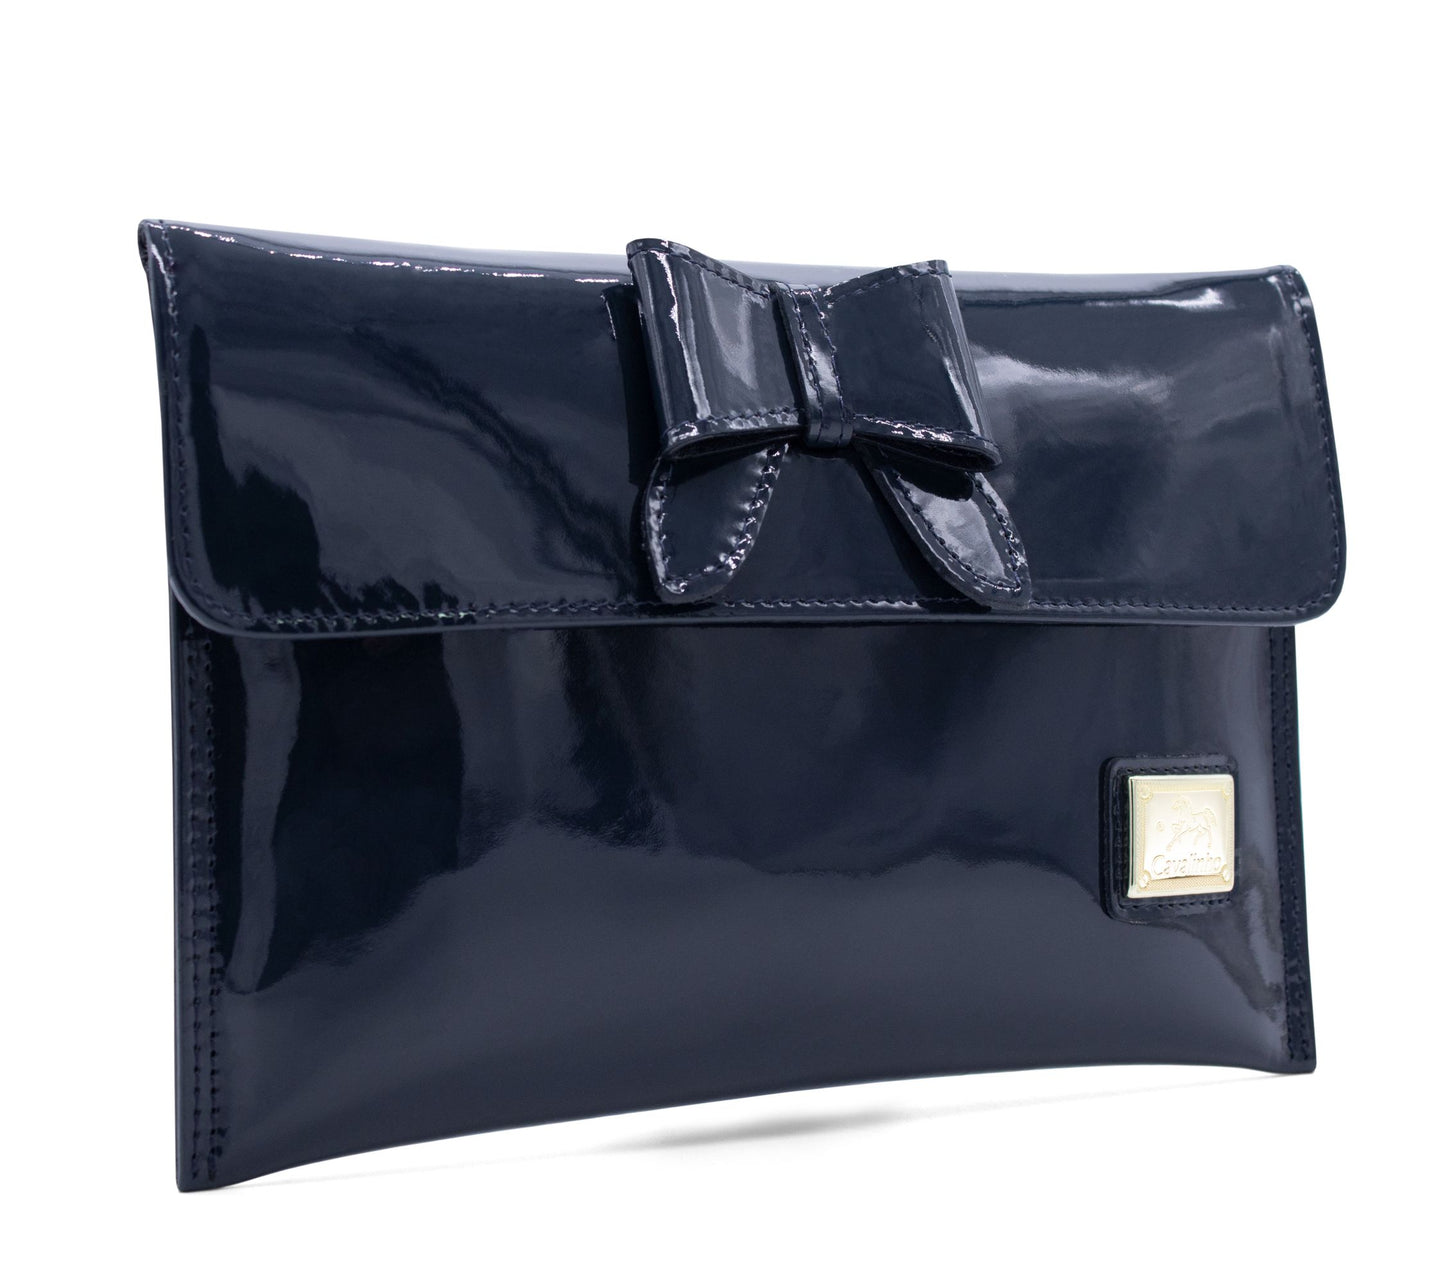 Cavalinho All In Patent Leather Clutch Bag - Navy - 18090068.03_2